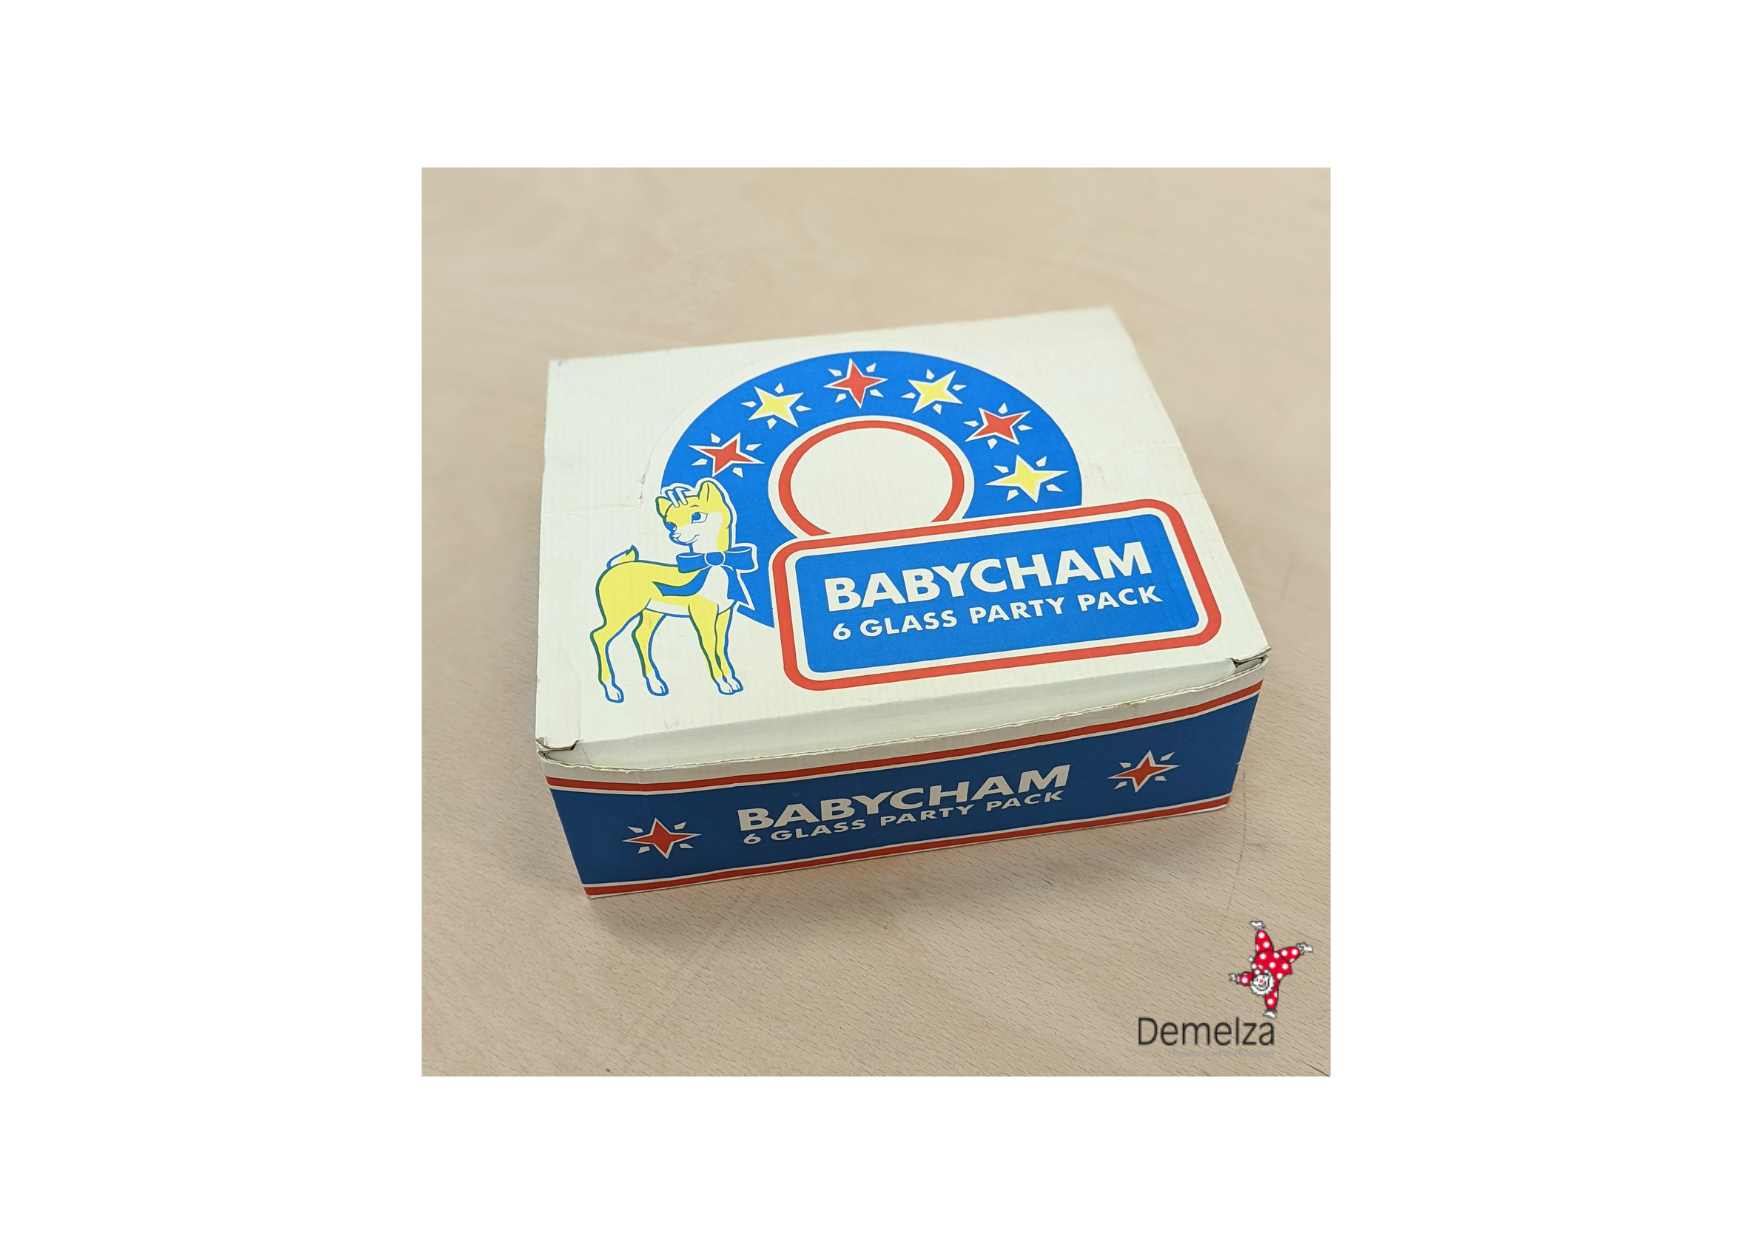 Six Babycham Clear Glasses with Babycham Deer Logo and Text with Original Box 